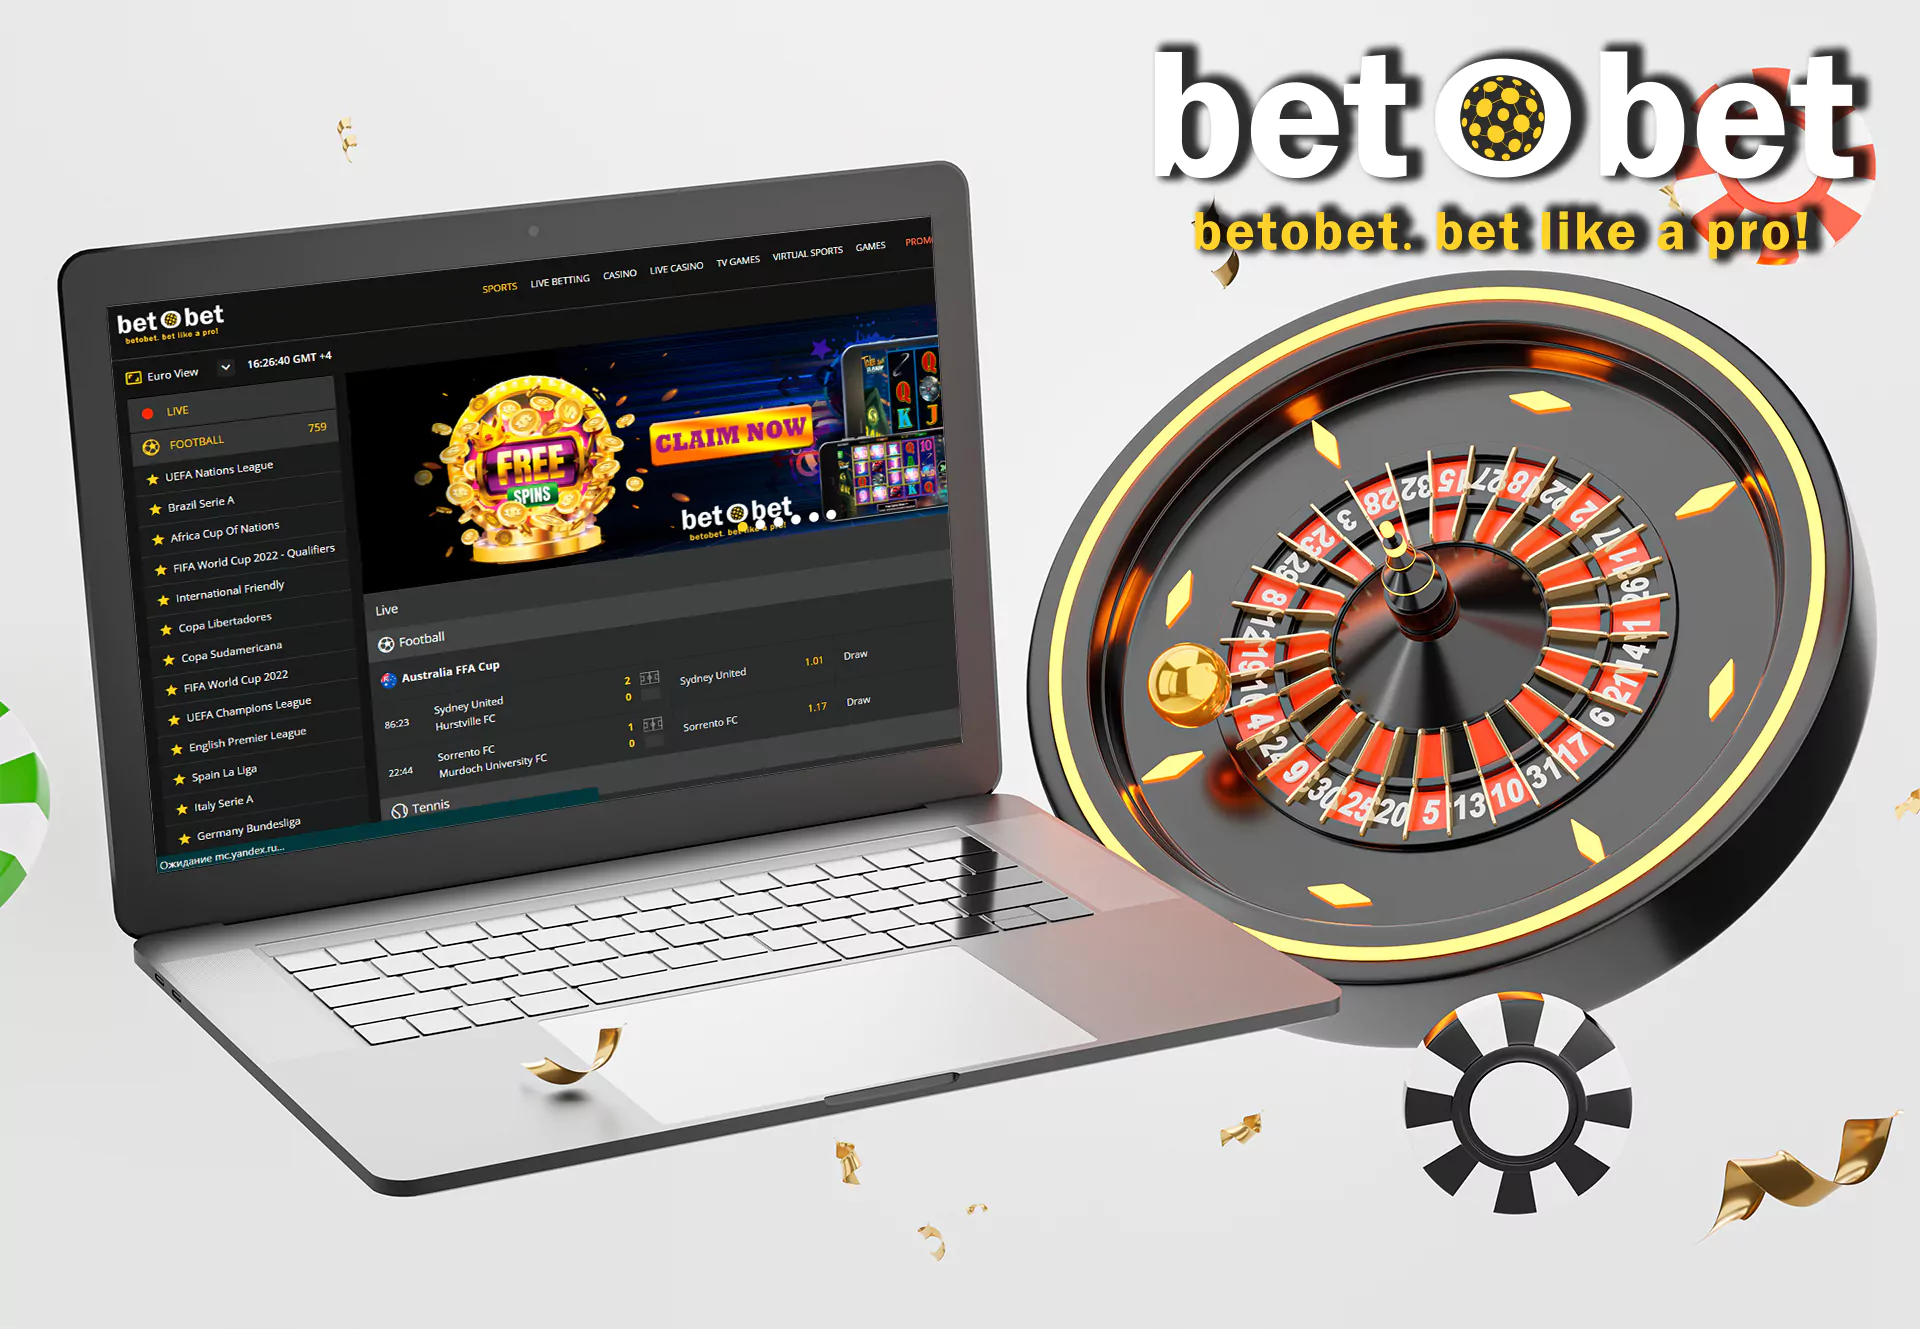 Opent the Bet O Bet registration form.